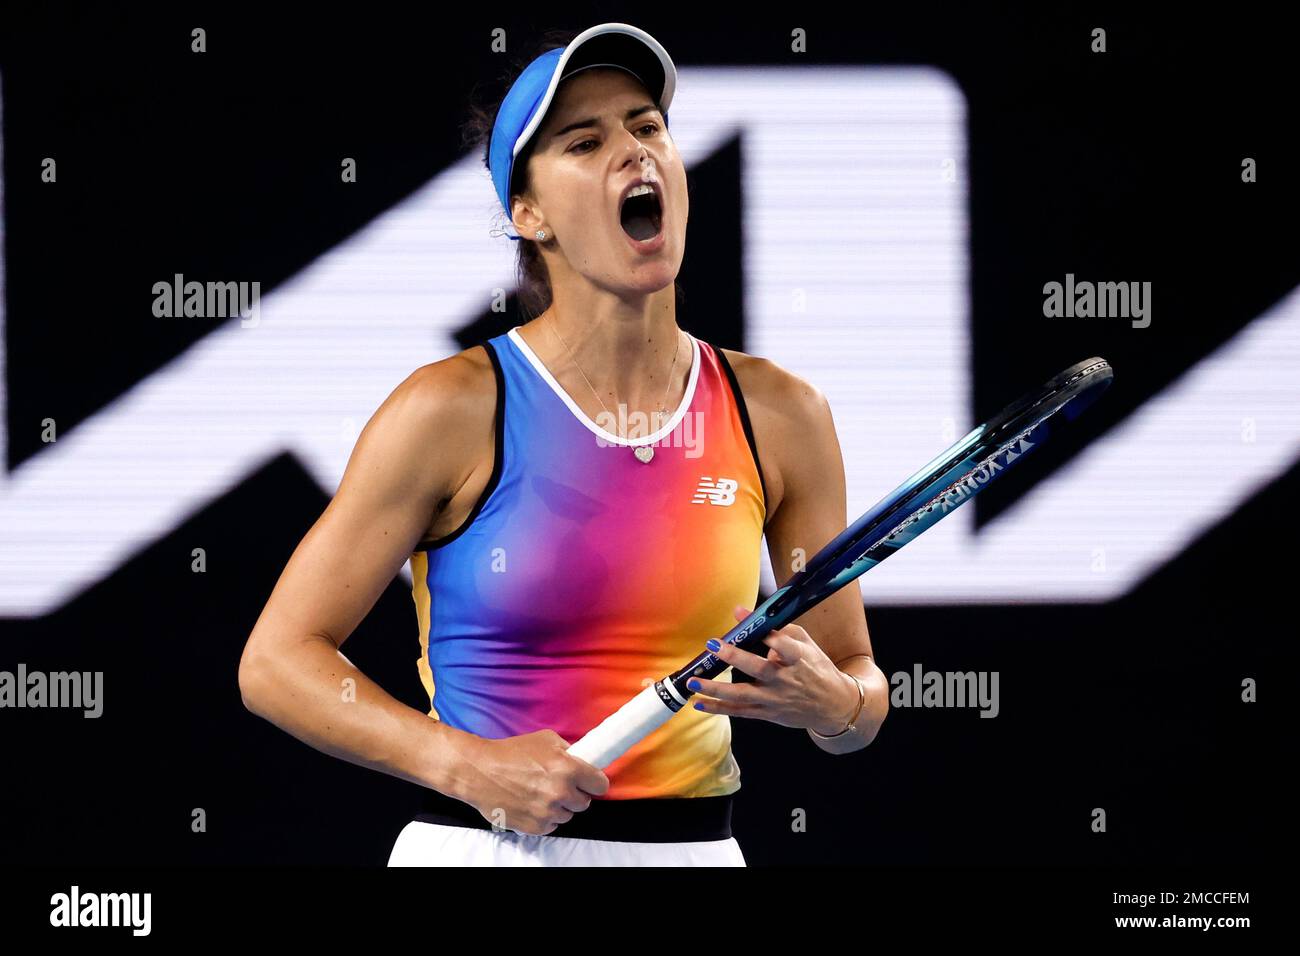 Sorana Cirstea of Romania reacts during her fourth round match against Iga Swiatek of Poland at the Australian Open tennis championships in Melbourne, Australia, Monday, Jan